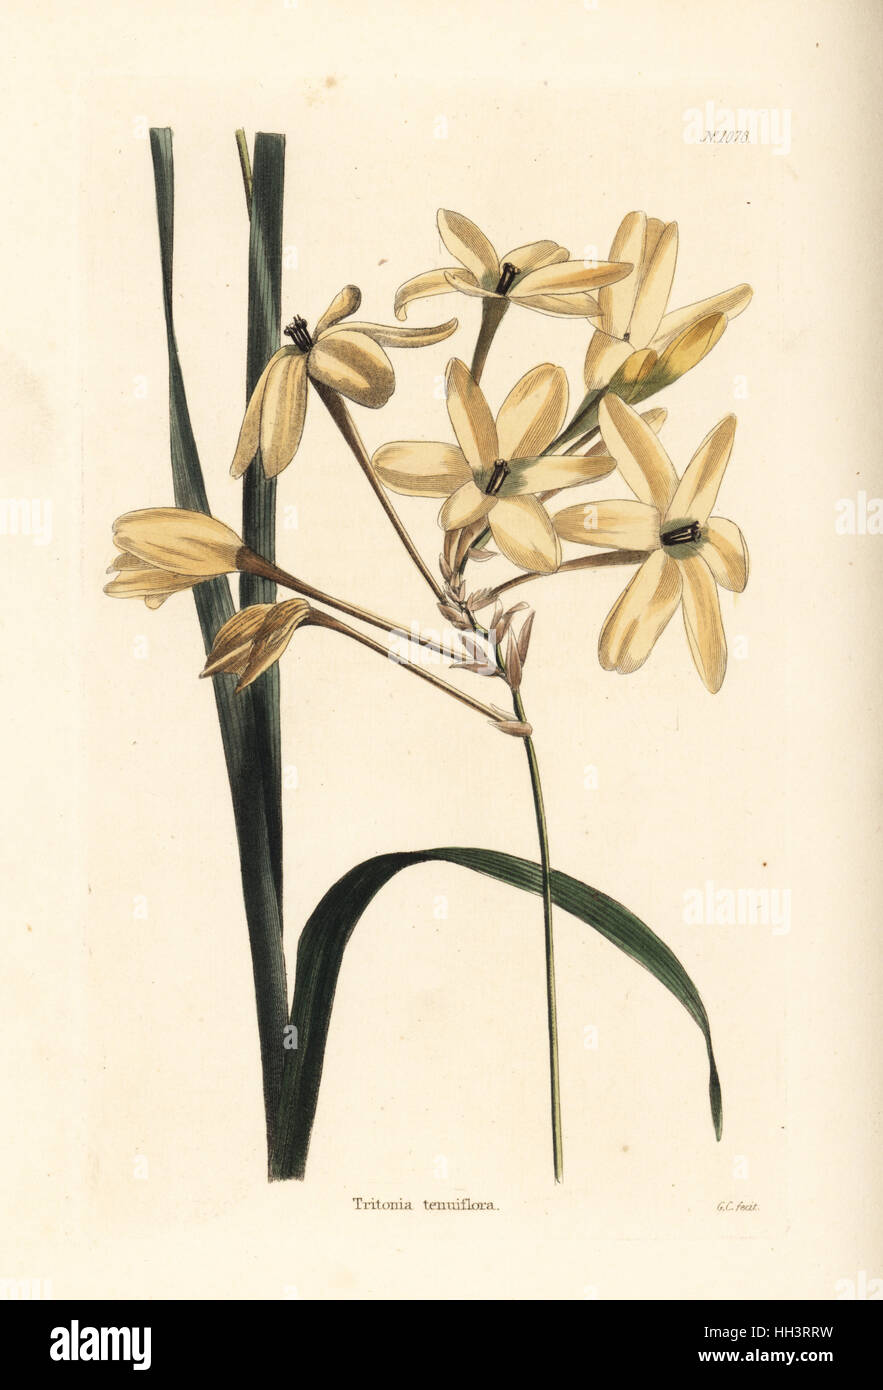 Ixia paniculata (Tritonia tenuiflora). Handcoloured copperplate engraving by George Cooke from Conrad Loddiges' Botanical Cabinet, Hackney, 1825. Stock Photo